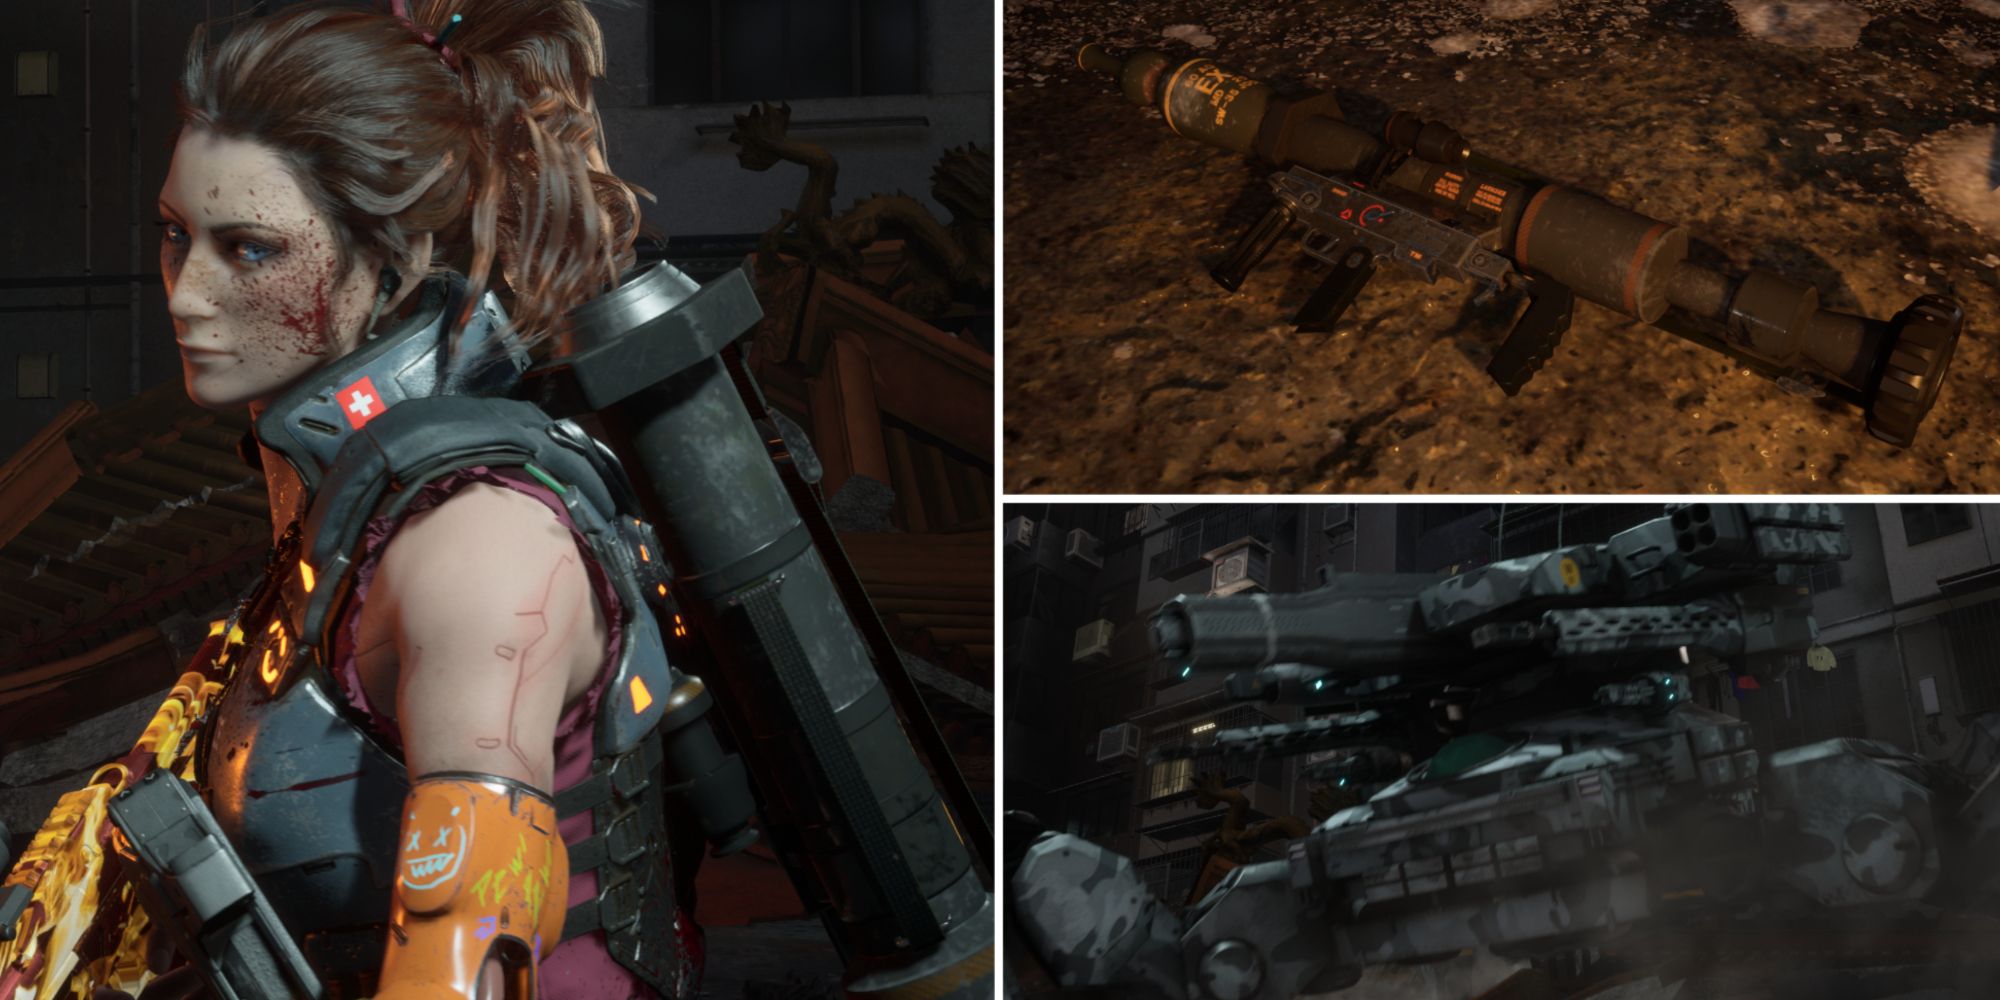 A collage of images with the leftmost being of Stone from Wanted: Dead with blood splattered on her face, wielding her AR with an RPG on her back. The top right image is a close-up of an RPG on the ground, and the bottom right image is one of the two Spider Tanks in the Dual Spider Tank encounter.